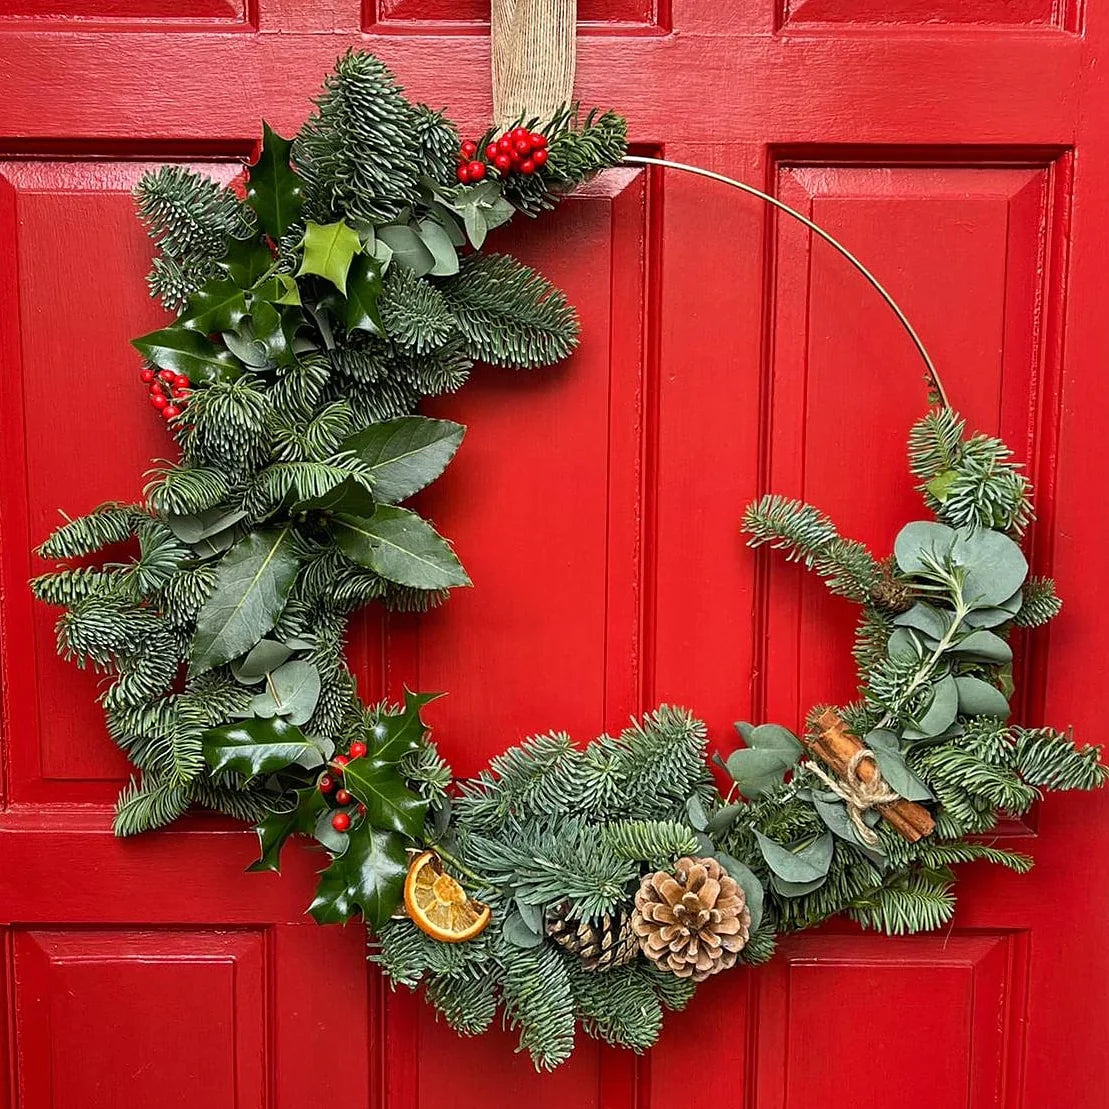 Christmas Wreath Workshop with Red Kite Plants - Monday 11 December